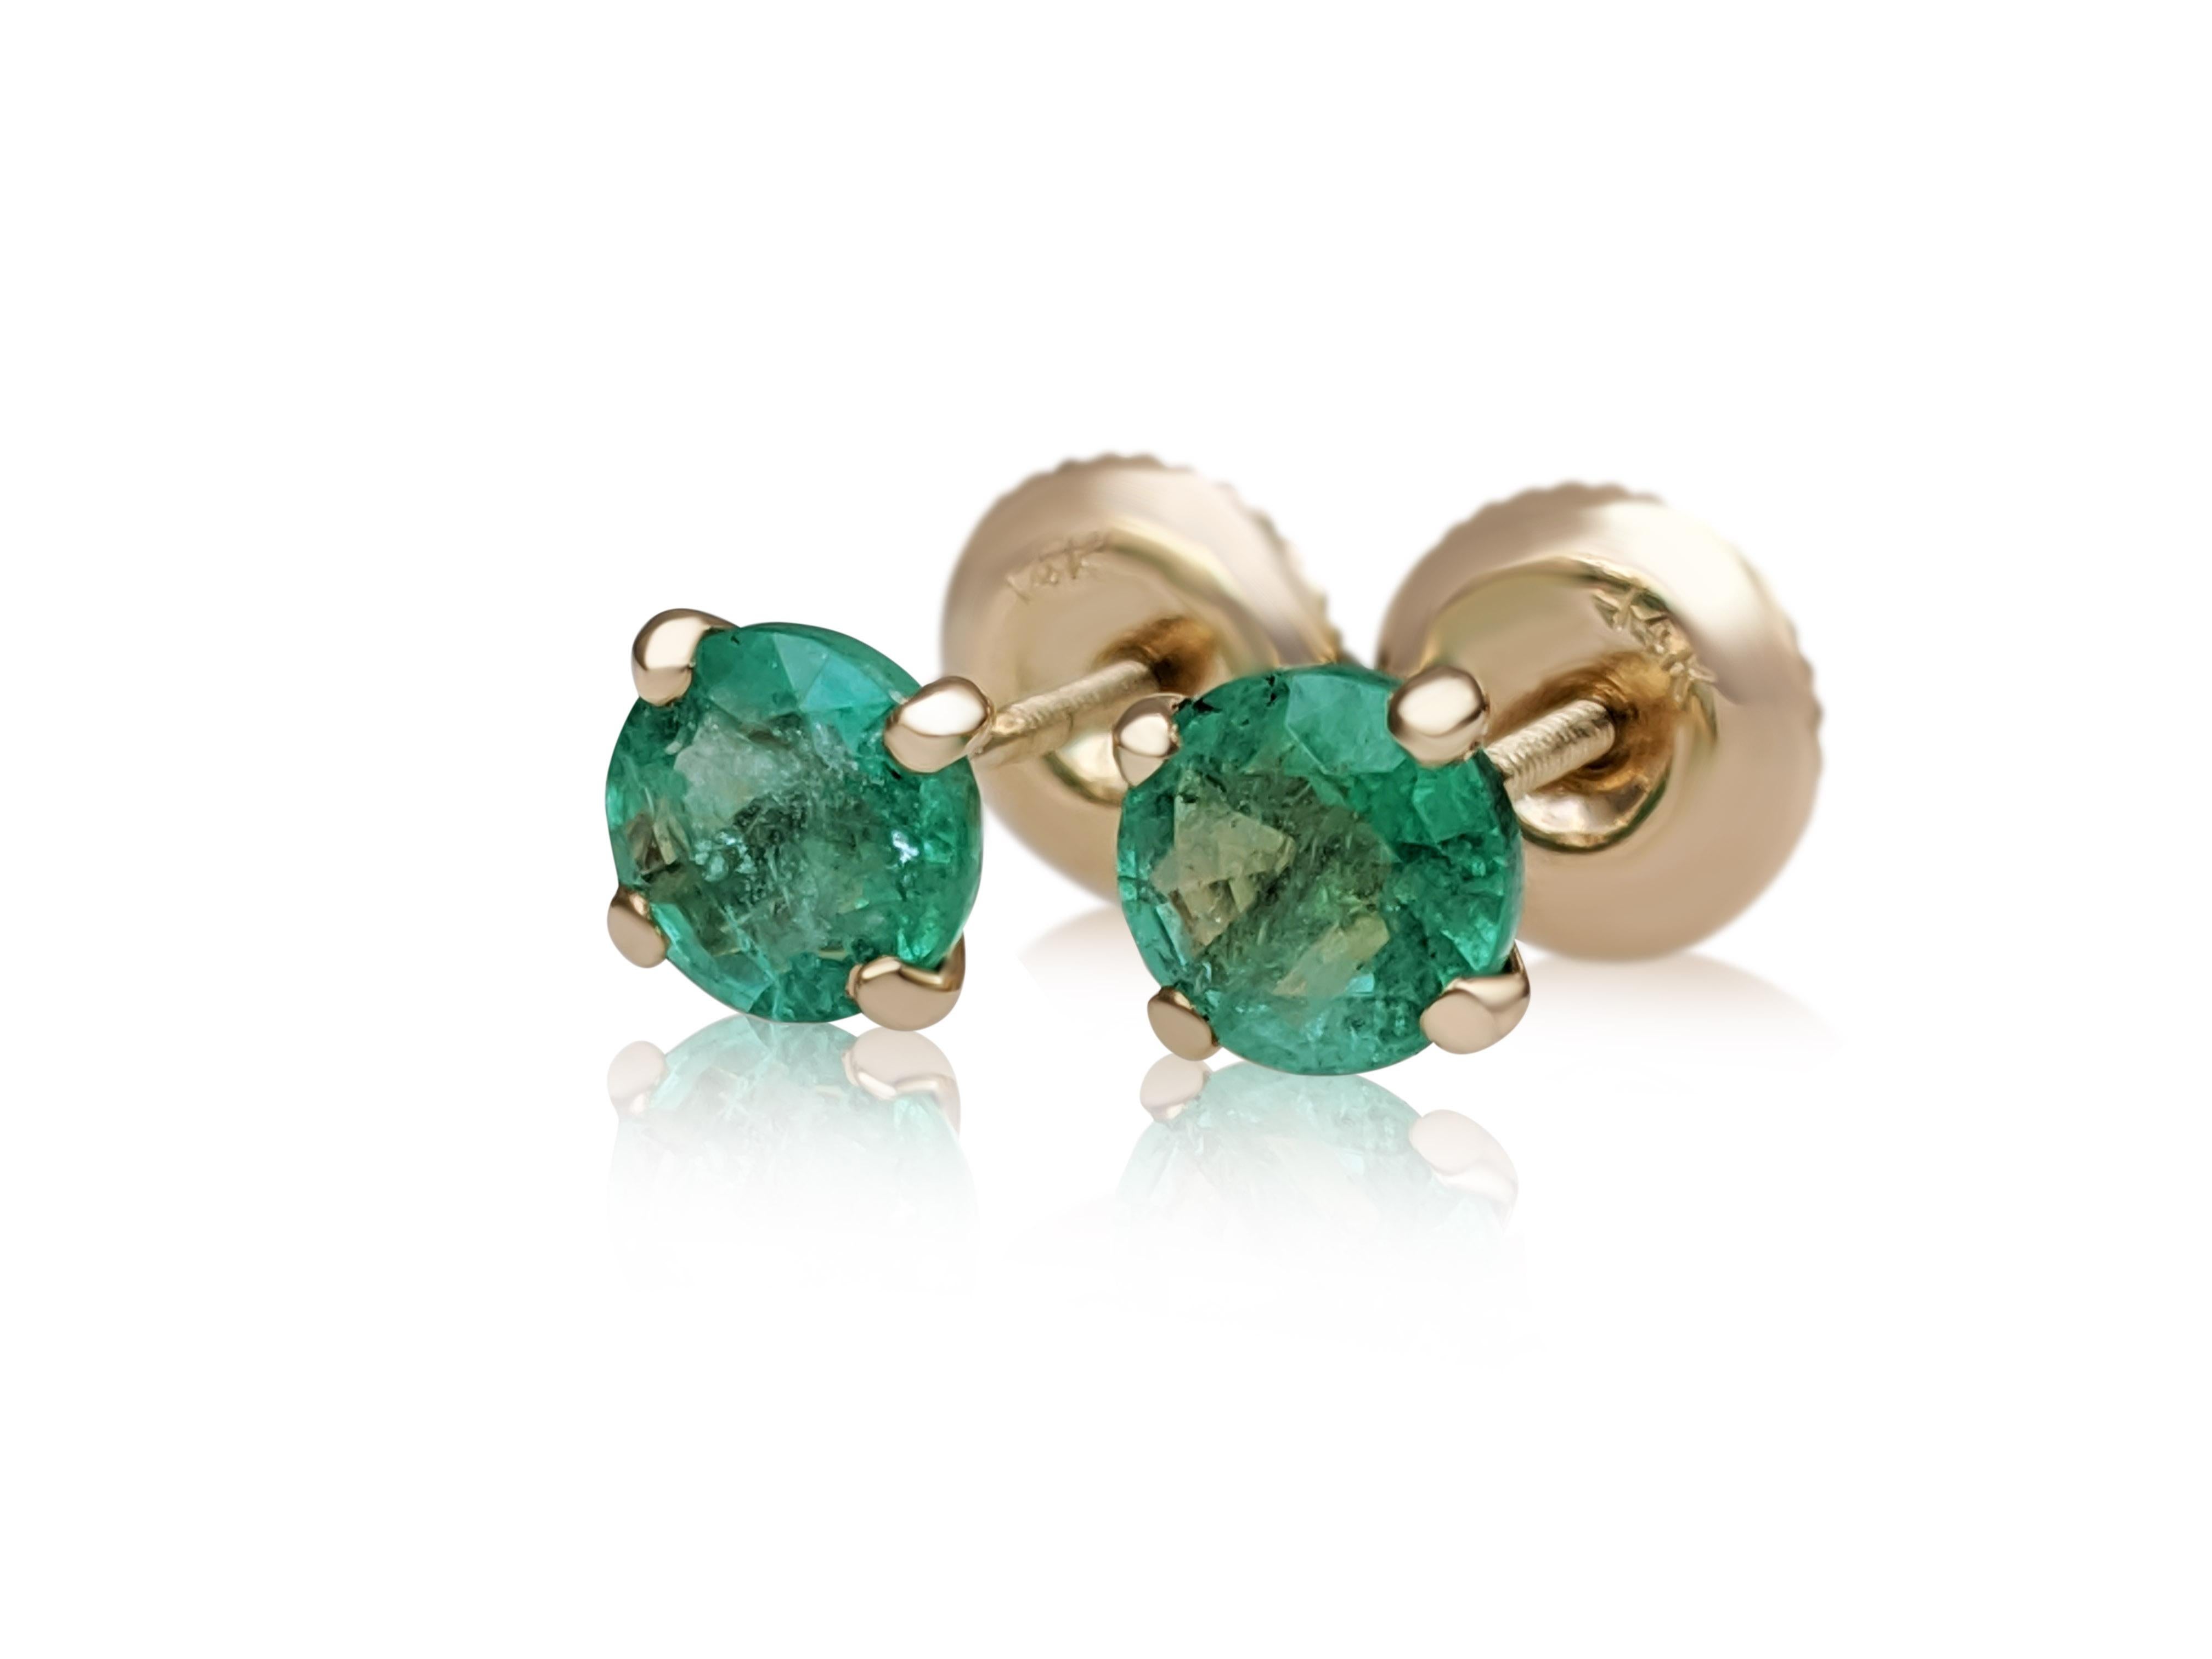 Round Cut NO RESERVE! 1.04 Ct Emerald - 14 kt. Yellow gold - Earrings For Sale